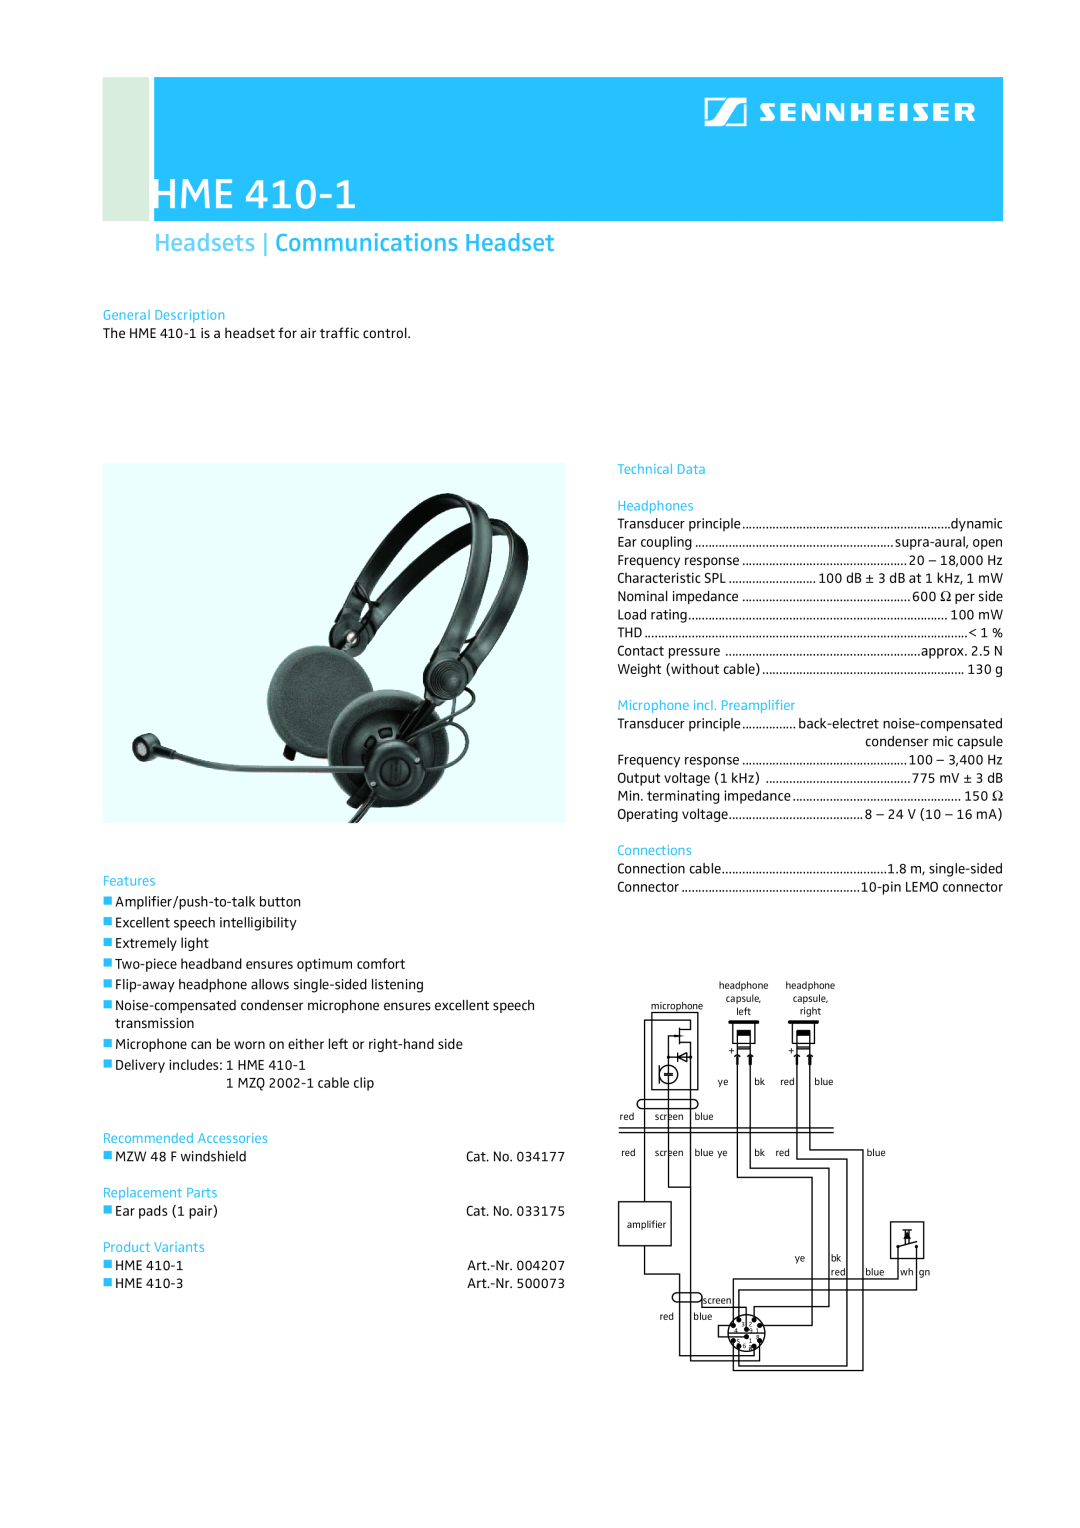 Sennheiser HME 410-1 manual Headsets Communications Headset, General Description, Features, Recommended Accessories 